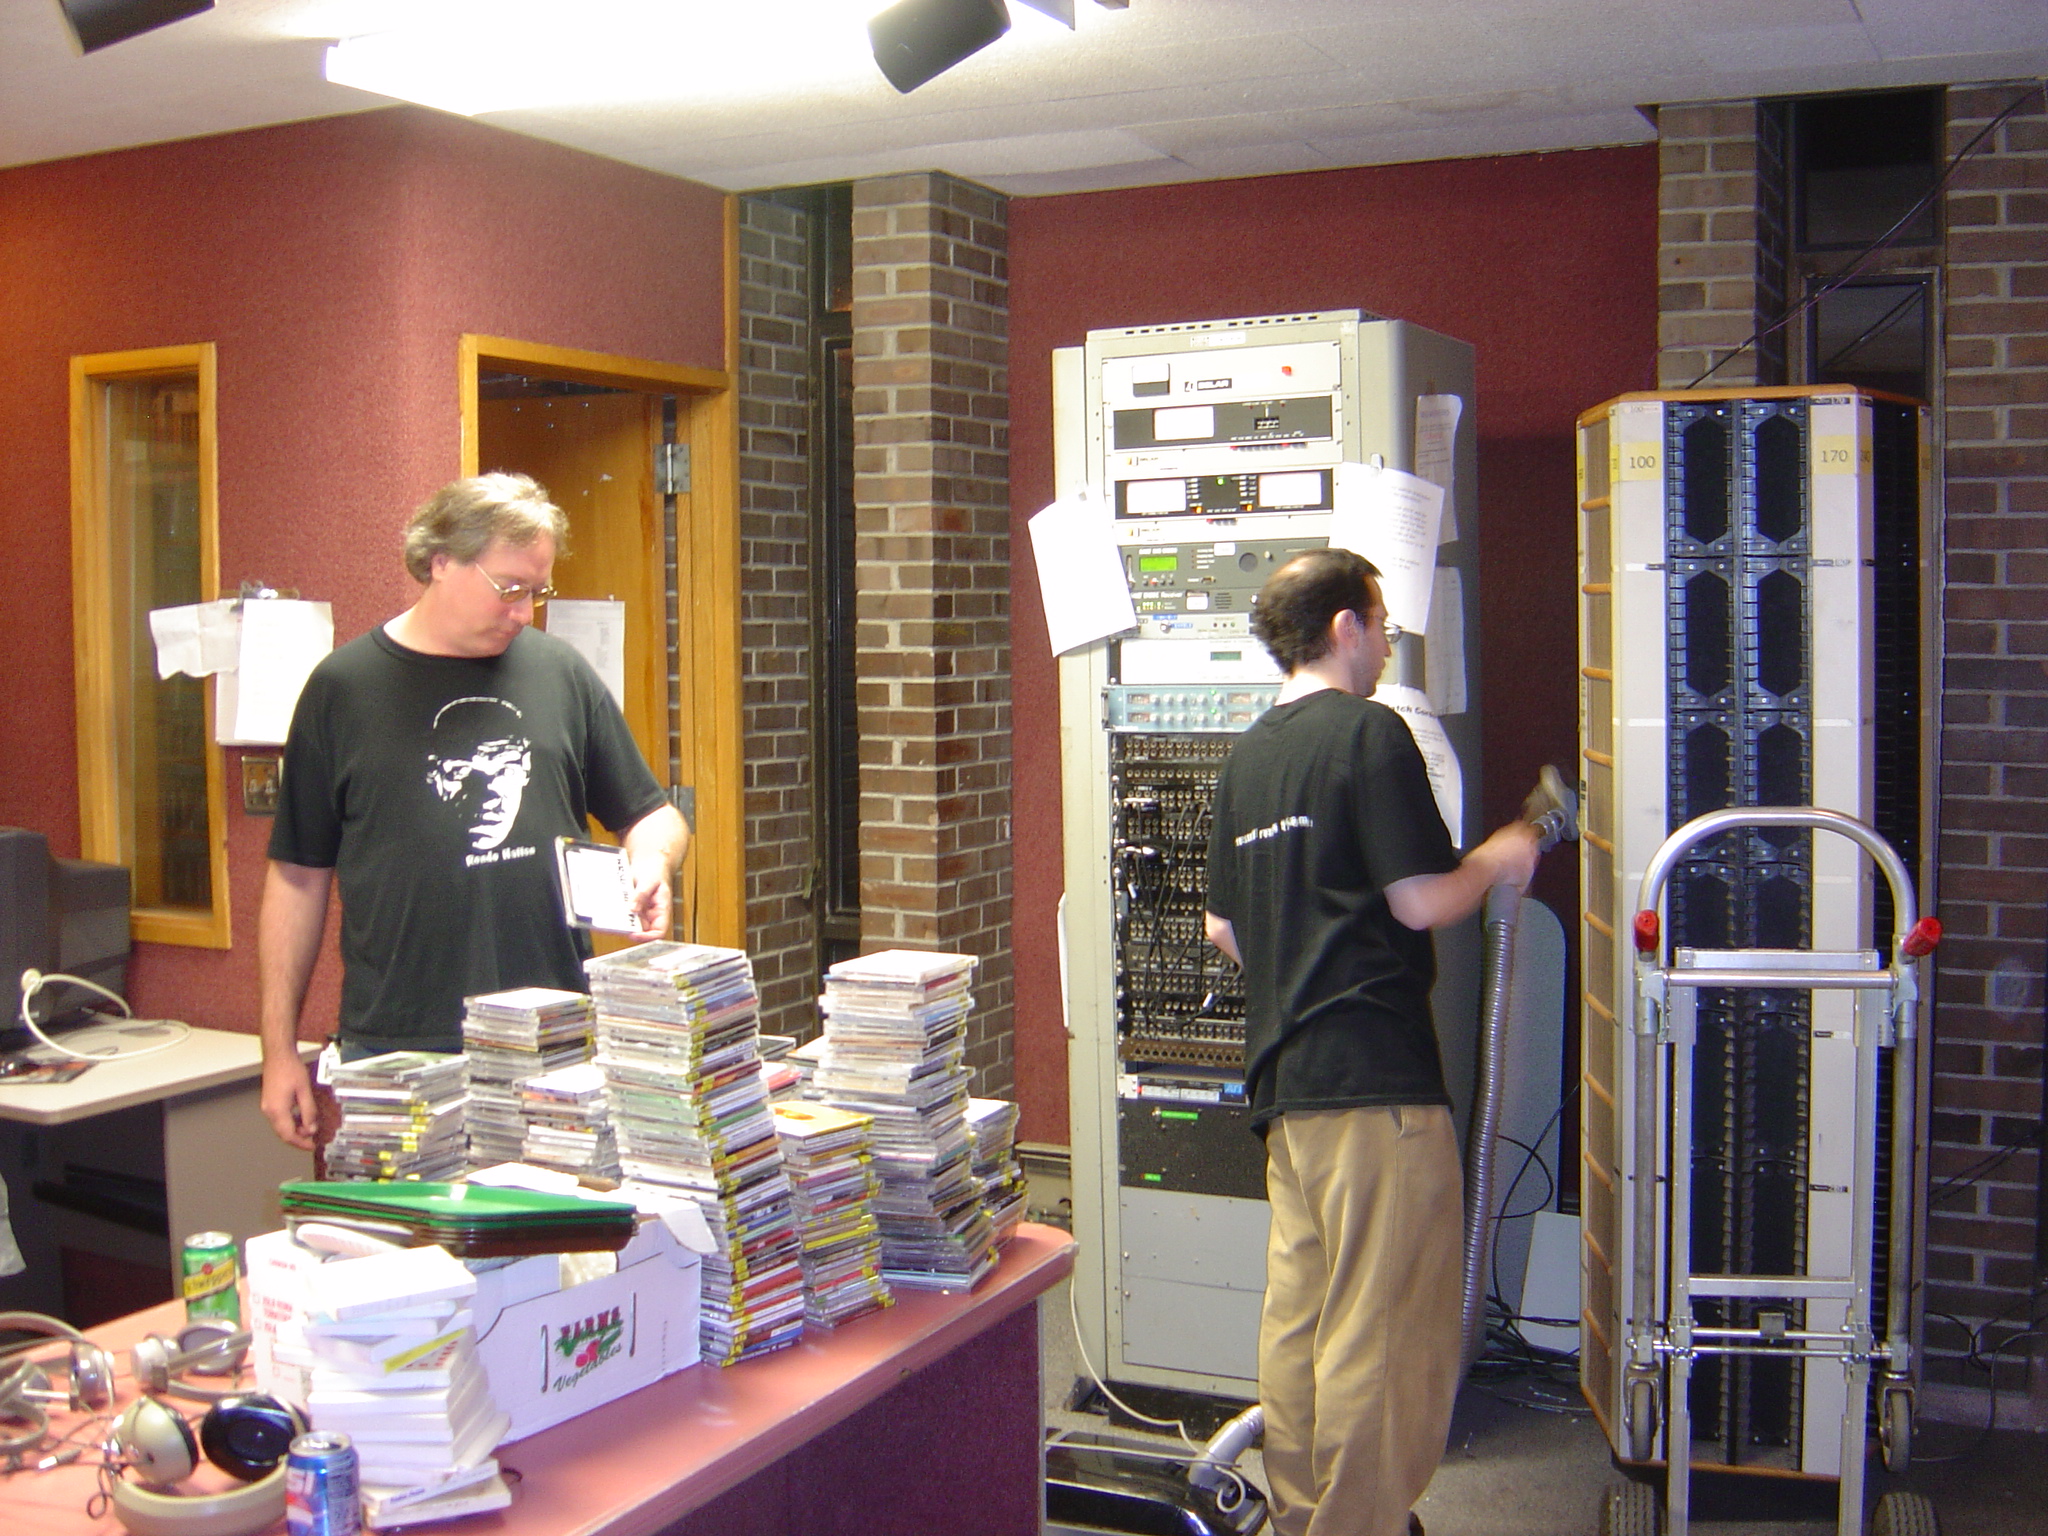 2006 Music meeting being held in production - Geoffe Pappe and Cory Goldberg